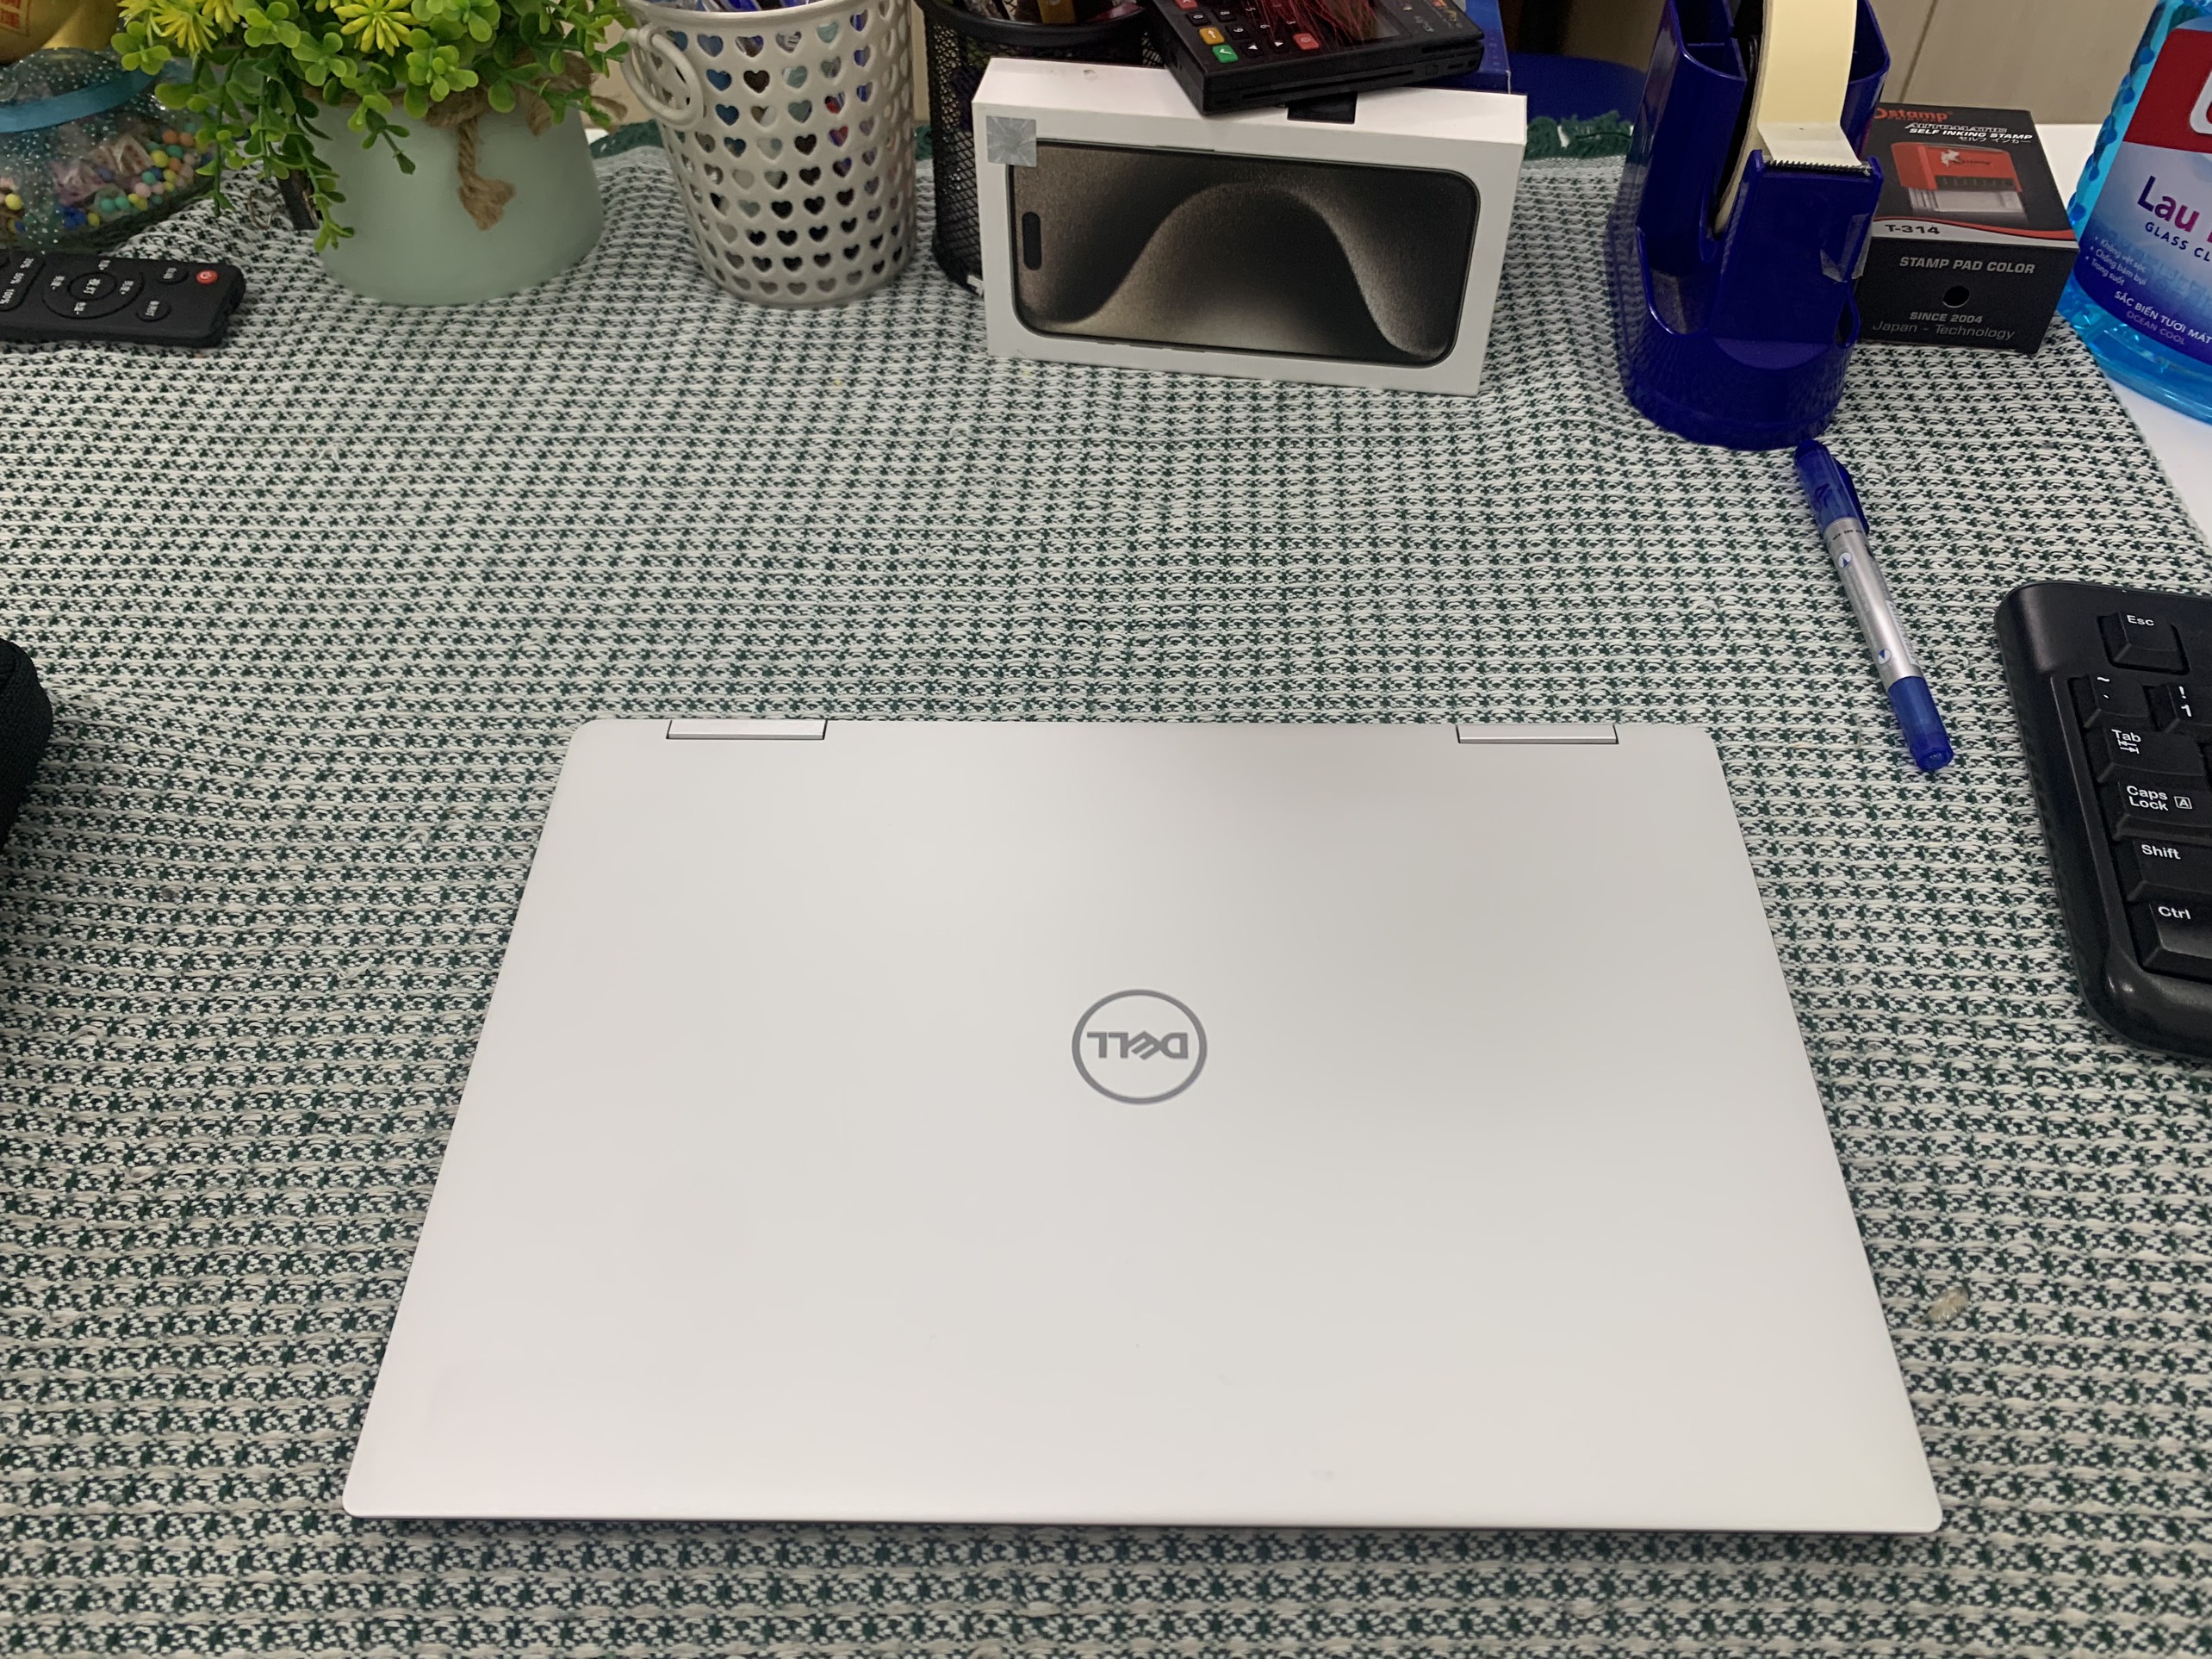 Dell XPS 13 7390 2 in 1